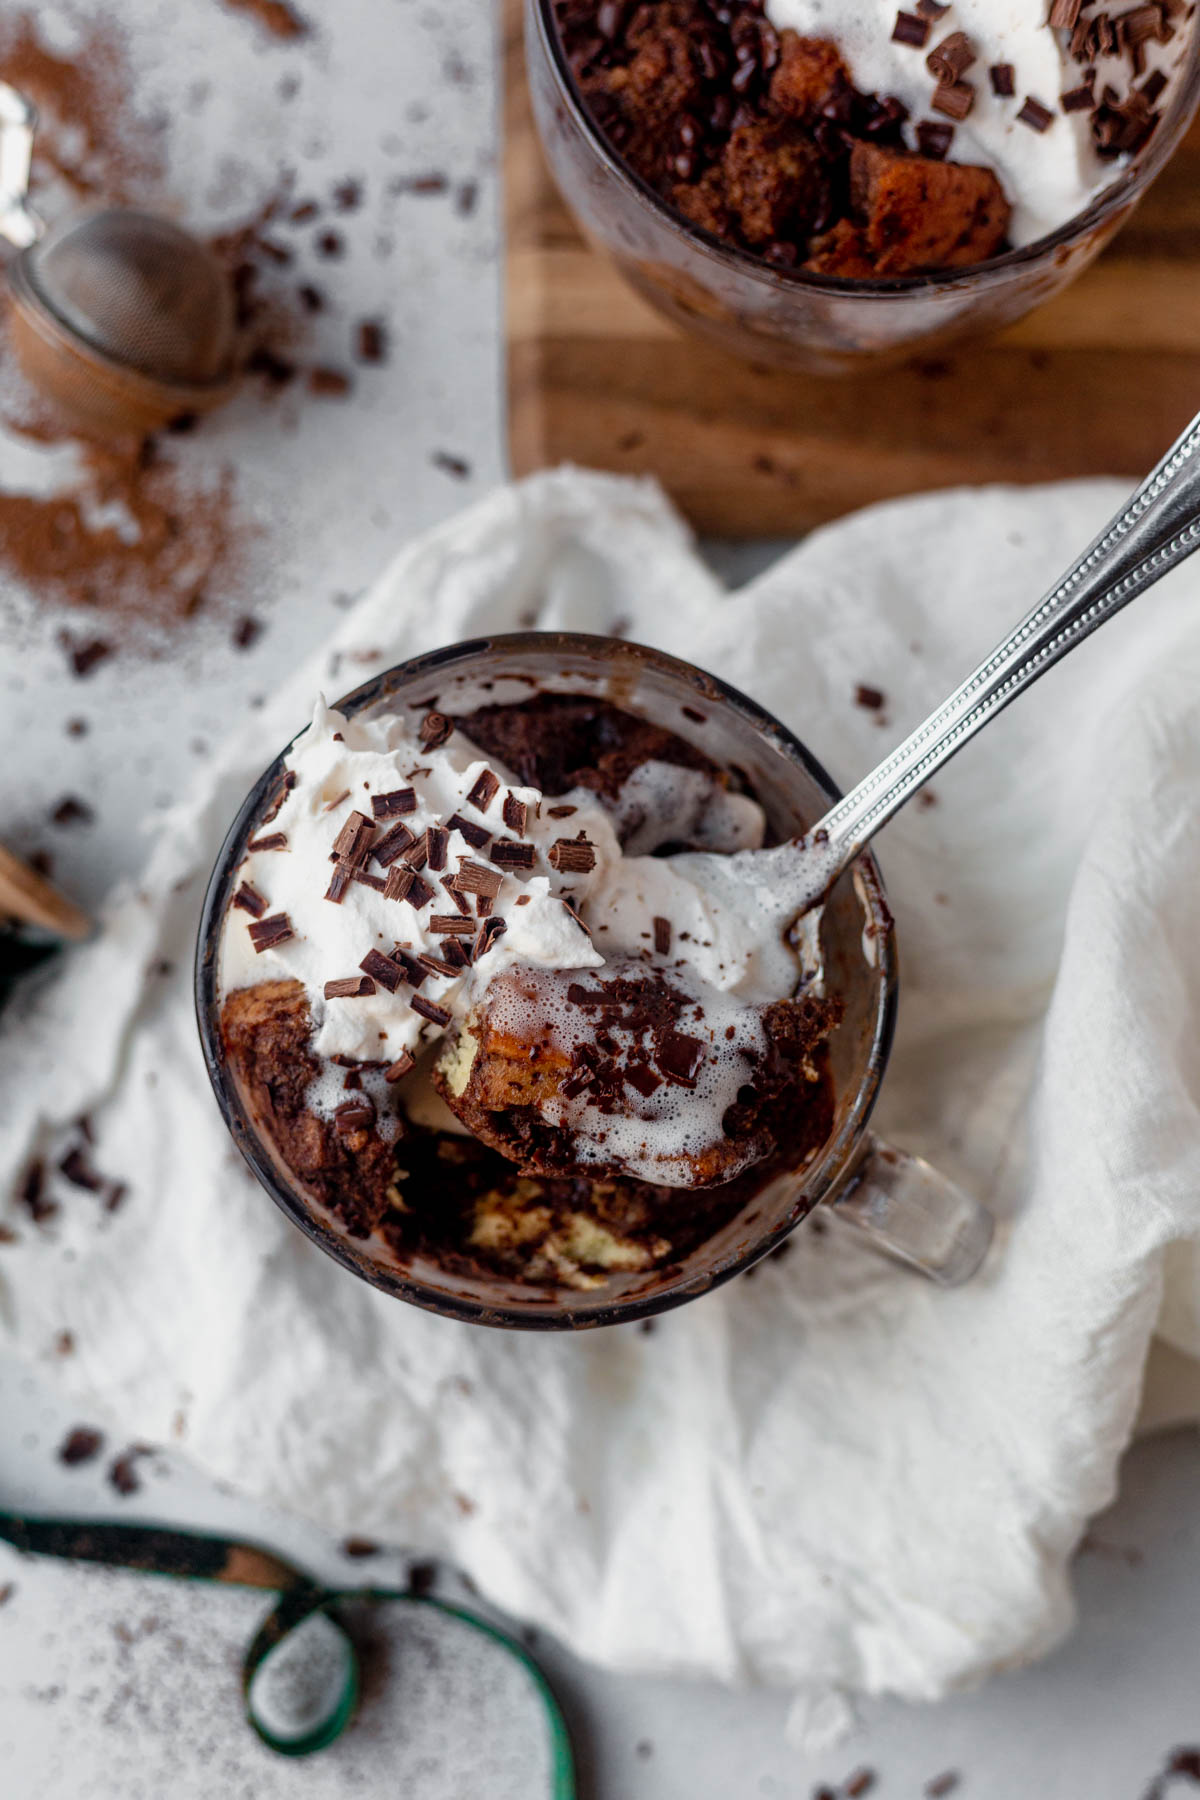 a spoon scooping out a bite of chocolate microwave bread pudding with whipped cream on top